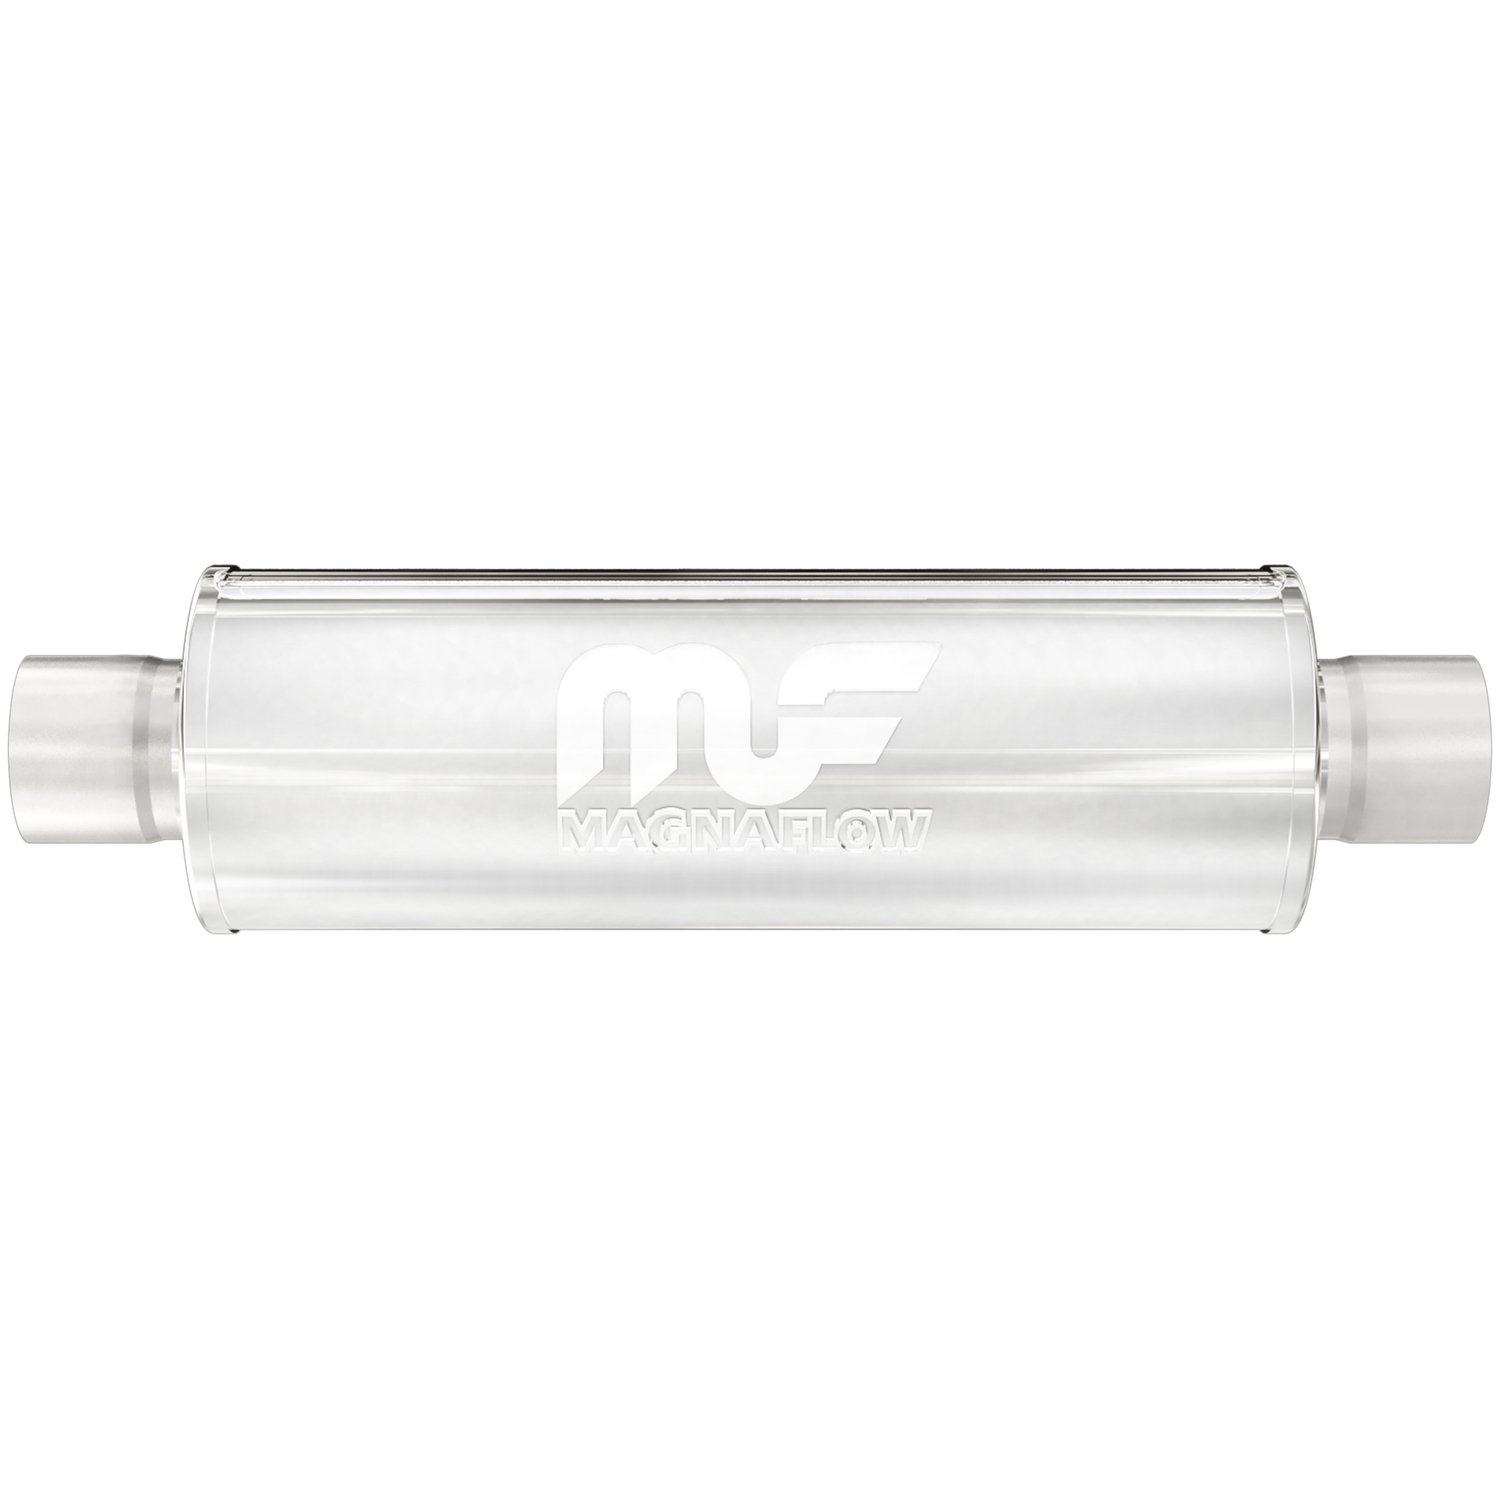 6" Round Muffler Center In/Center Out: 3" Body Length: 30" Overall Length: 36" Core Size: 3" Satin Finish